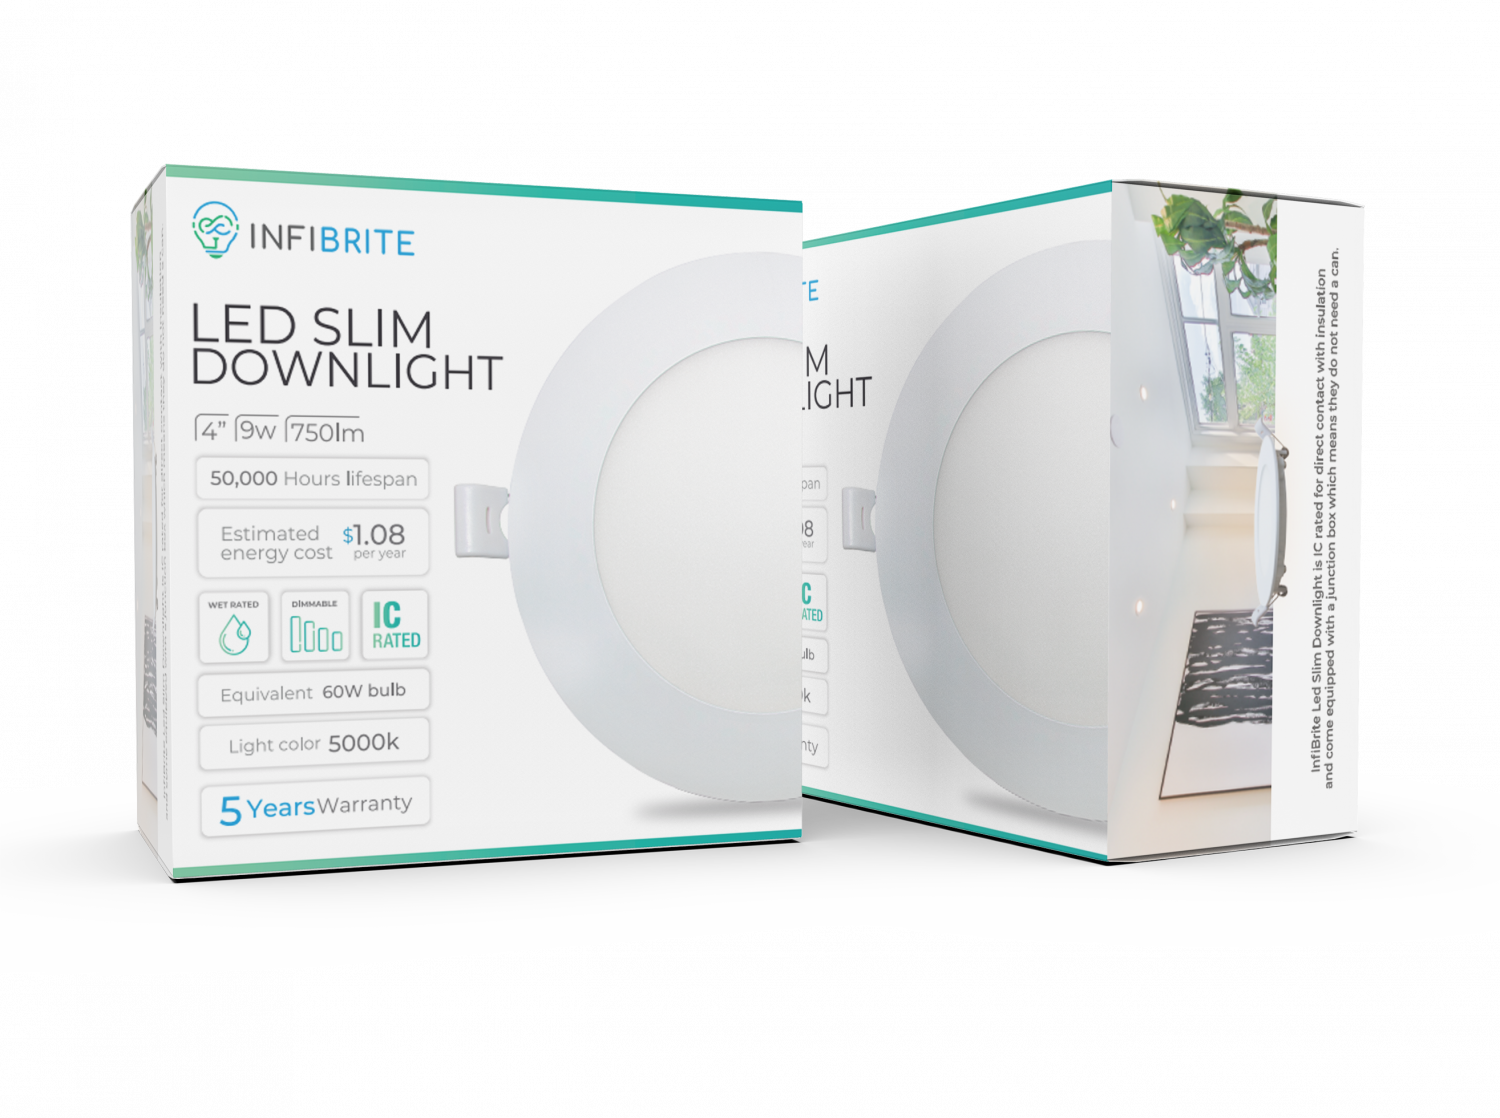 Infibrite 4 Inch 5000K Daylight 9W 750 LM Ultra-Slim LED Ceiling Light with Junction Box, Flush Mount, Dimmable, Fixture for Bedroom, Wet Rated for Bathroom, Easy Install, 75W Eqv, ETL & Energy Star, US Company (12 Pack)